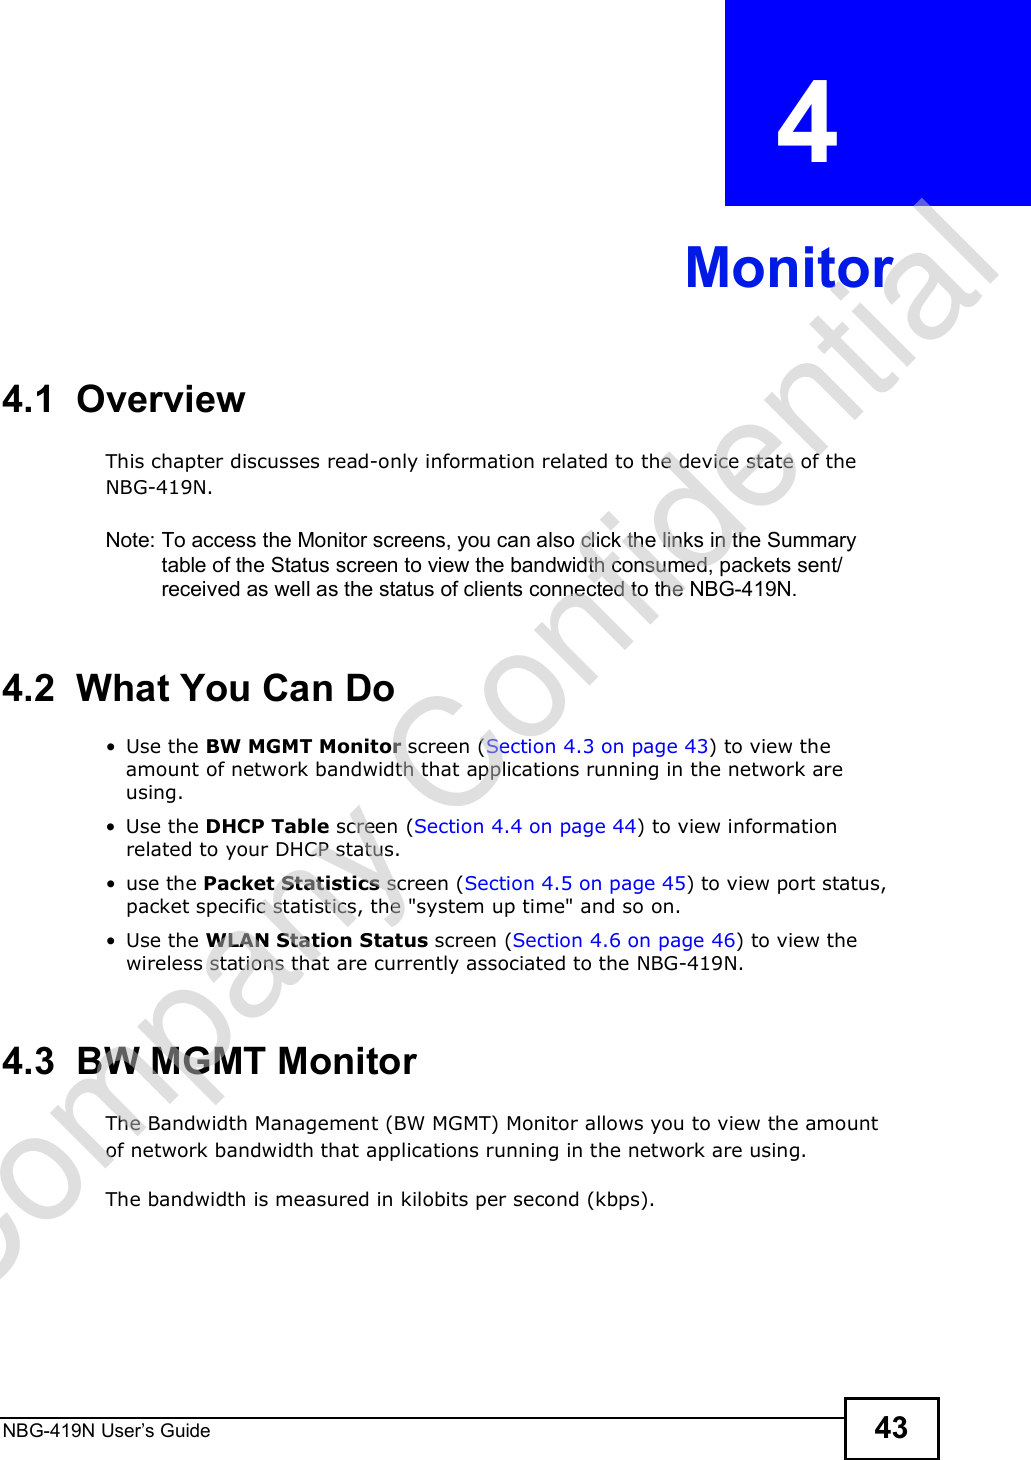 NBG-419N User s Guide 43CHAPTER  4 Monitor4.1  OverviewThis chapter discusses read-only information related to the device state of the NBG-419N. Note: To access the Monitor screens, you can also click the links in the Summary table of the Status screen to view the bandwidth consumed, packets sent/received as well as the status of clients connected to the NBG-419N.4.2  What You Can Do Use the BW MGMT Monitor screen (Section 4.3 on page 43) to view the amount of network bandwidth that applications running in the network are using. Use the DHCP Table screen (Section 4.4 on page 44) to view information related to your DHCP status. use the Packet Statistics screen (Section 4.5 on page 45) to view port status, packet specific statistics, the &quot;system up time&quot; and so on. Use the WLAN Station Status screen (Section 4.6 on page 46) to view the wireless stations that are currently associated to the NBG-419N.4.3  BW MGMT MonitorThe Bandwidth Management (BW MGMT) Monitor allows you to view the amount of network bandwidth that applications running in the network are using.The bandwidth is measured in kilobits per second (kbps). Company Confidential